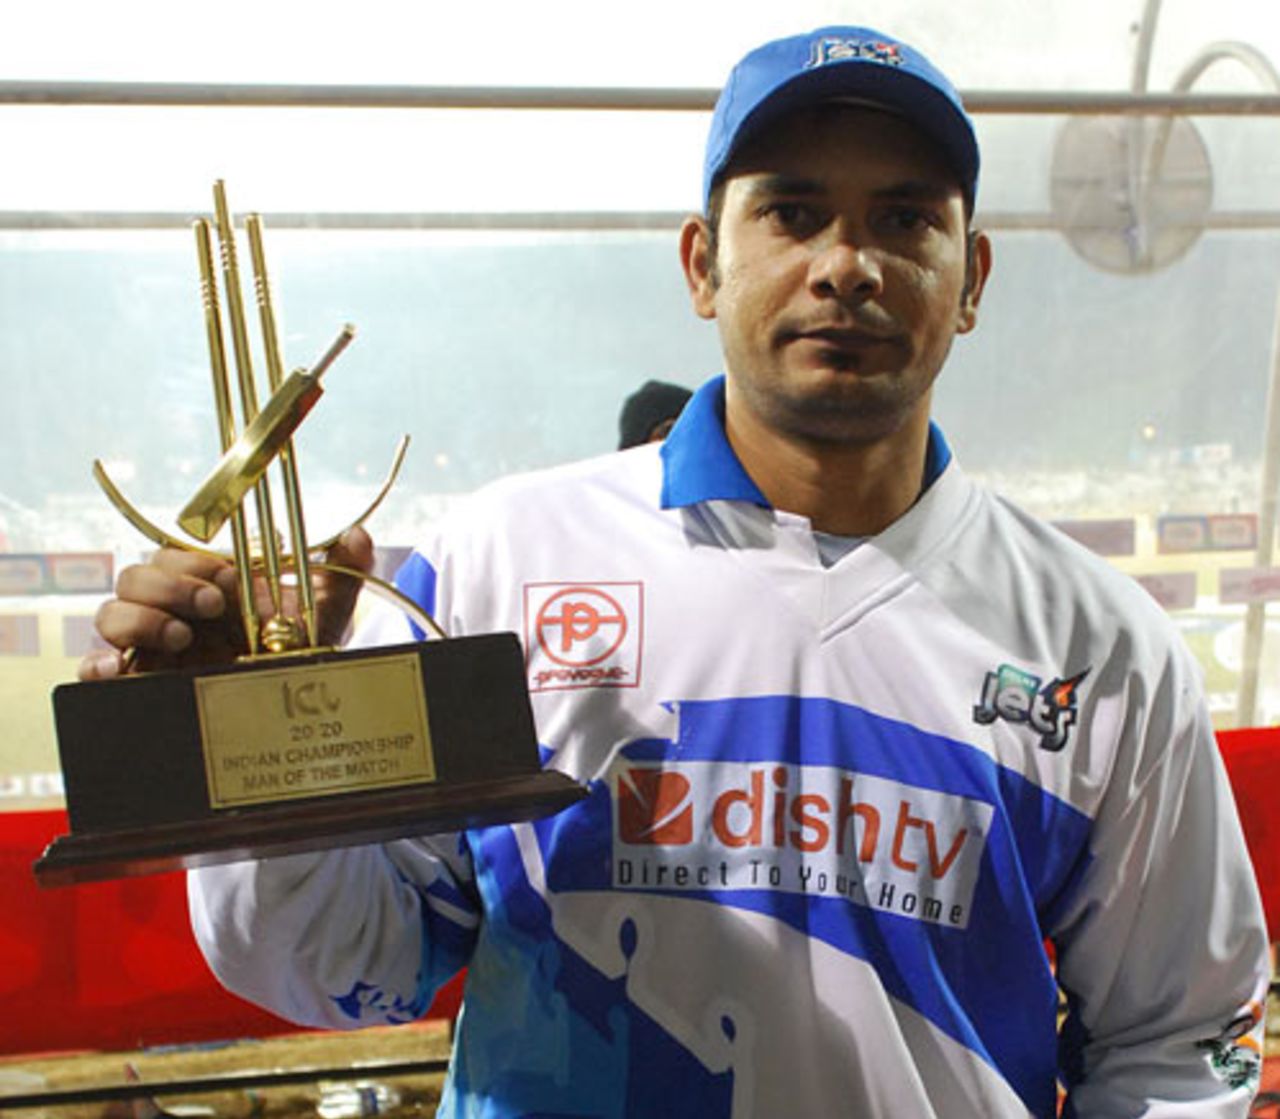 Abbas Ali poses with his Man-of-the-Match award, Chandigarh Lions v Delhi Jets, 2nd semi-final, Indian Cricket League, Panchkula, December 15, 2007